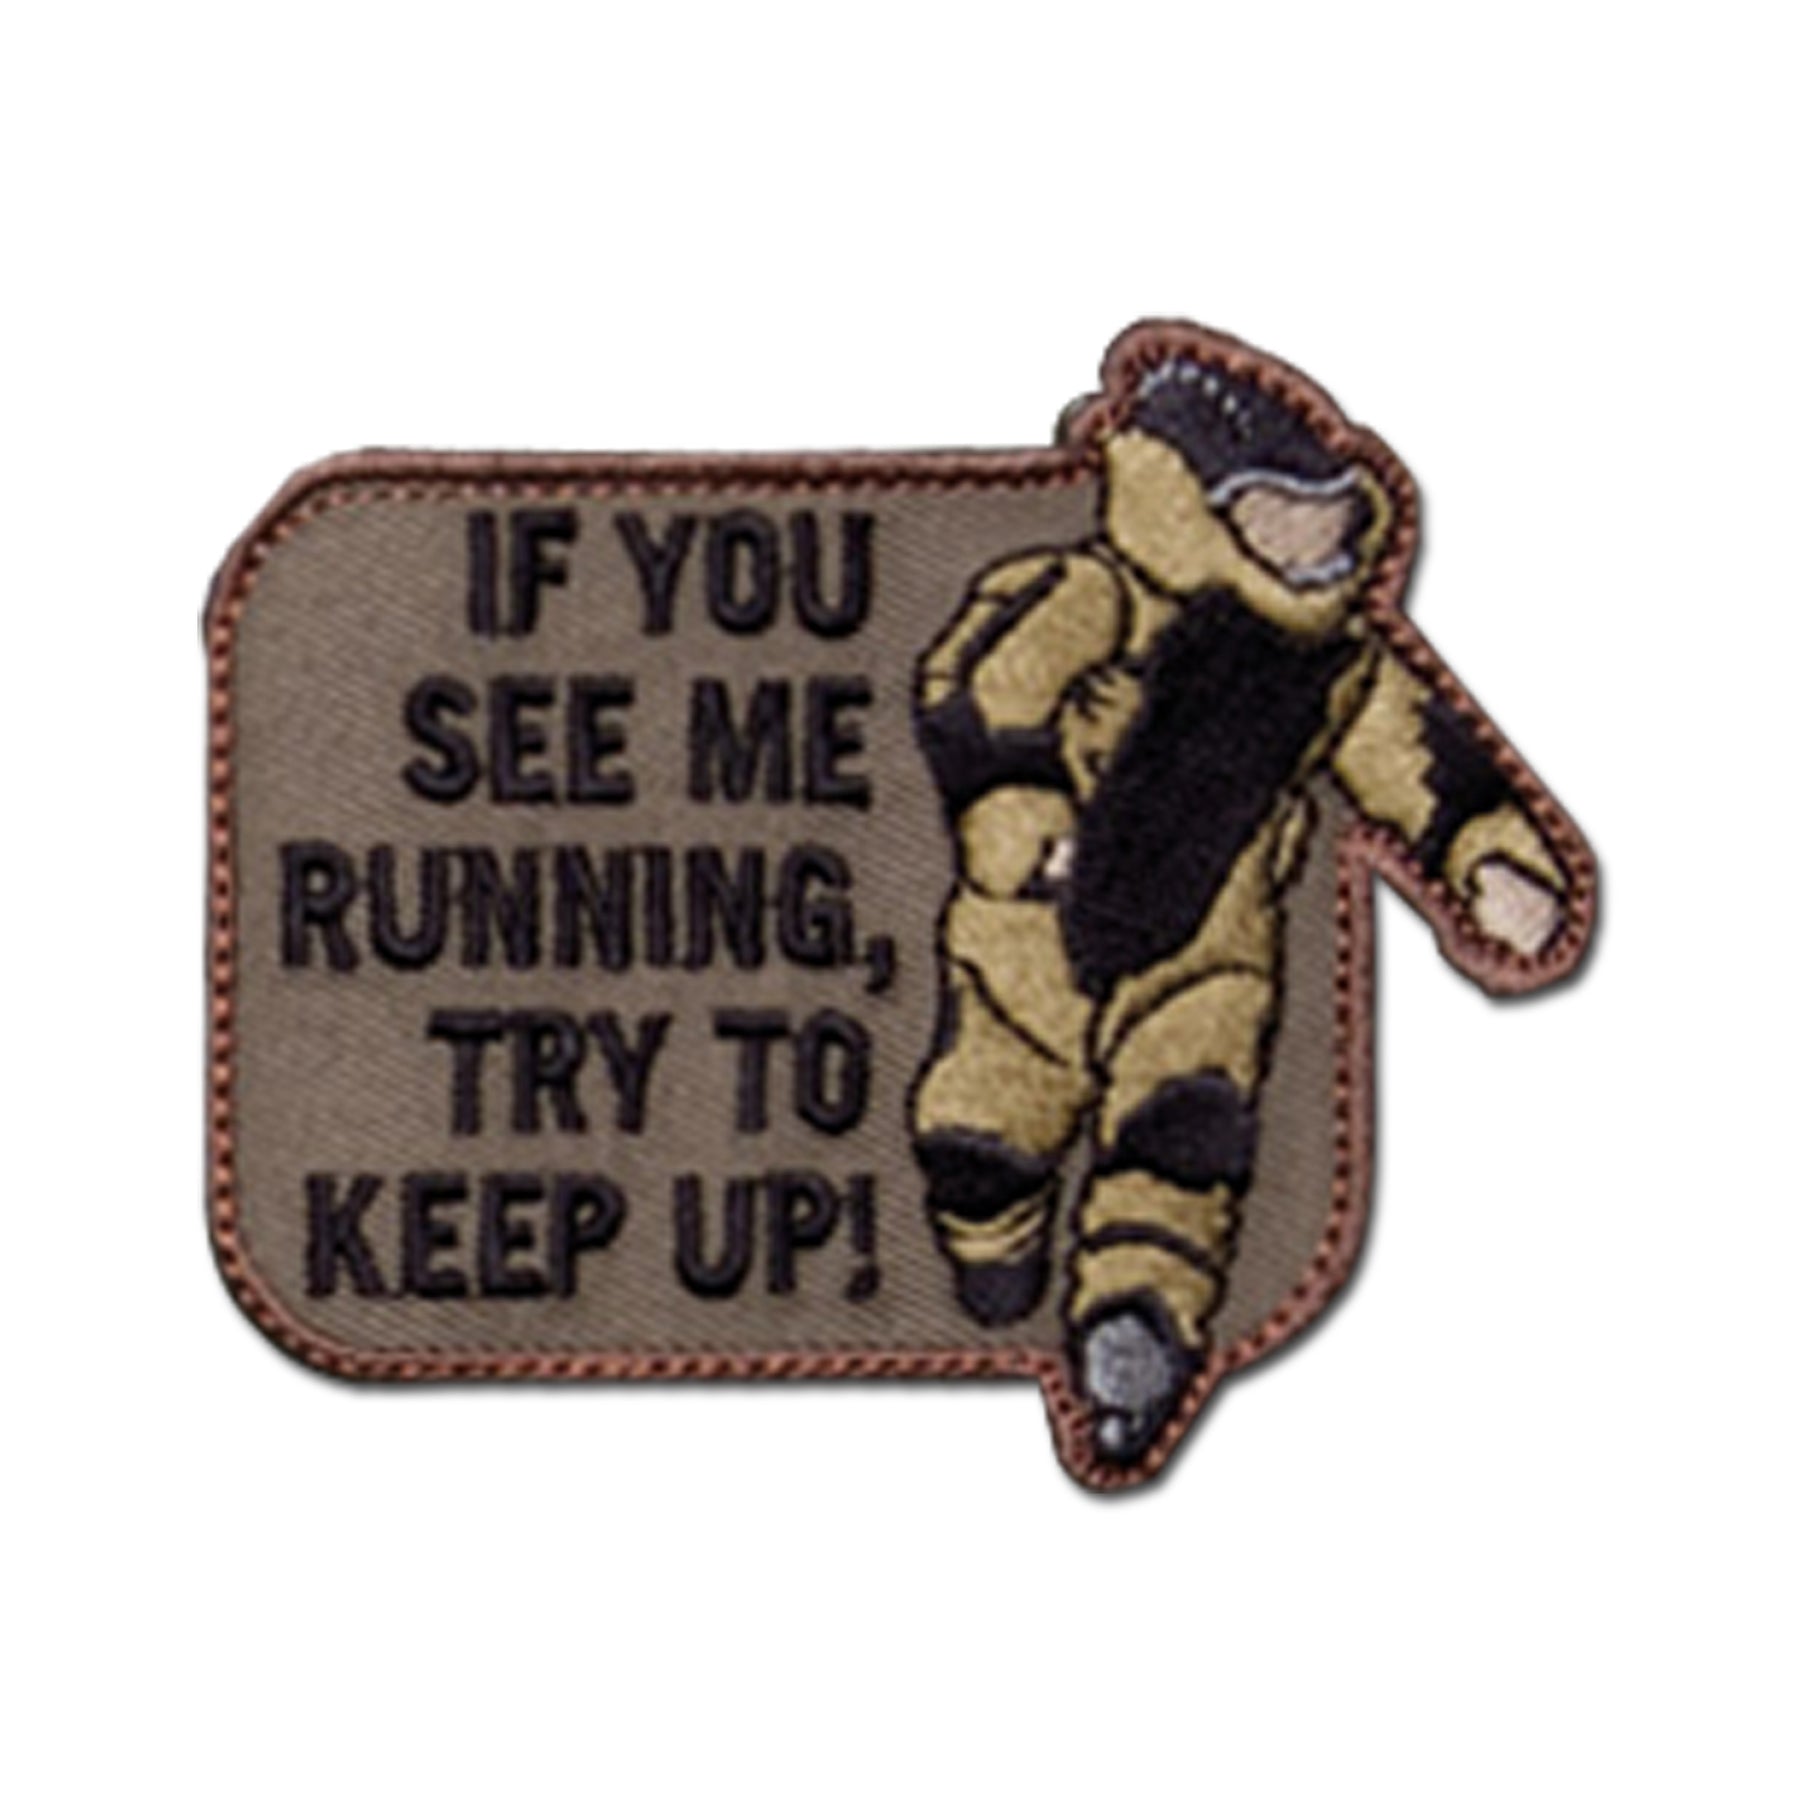 EOD Running Keep Up Morale Patch - Mil-Spec Monkey